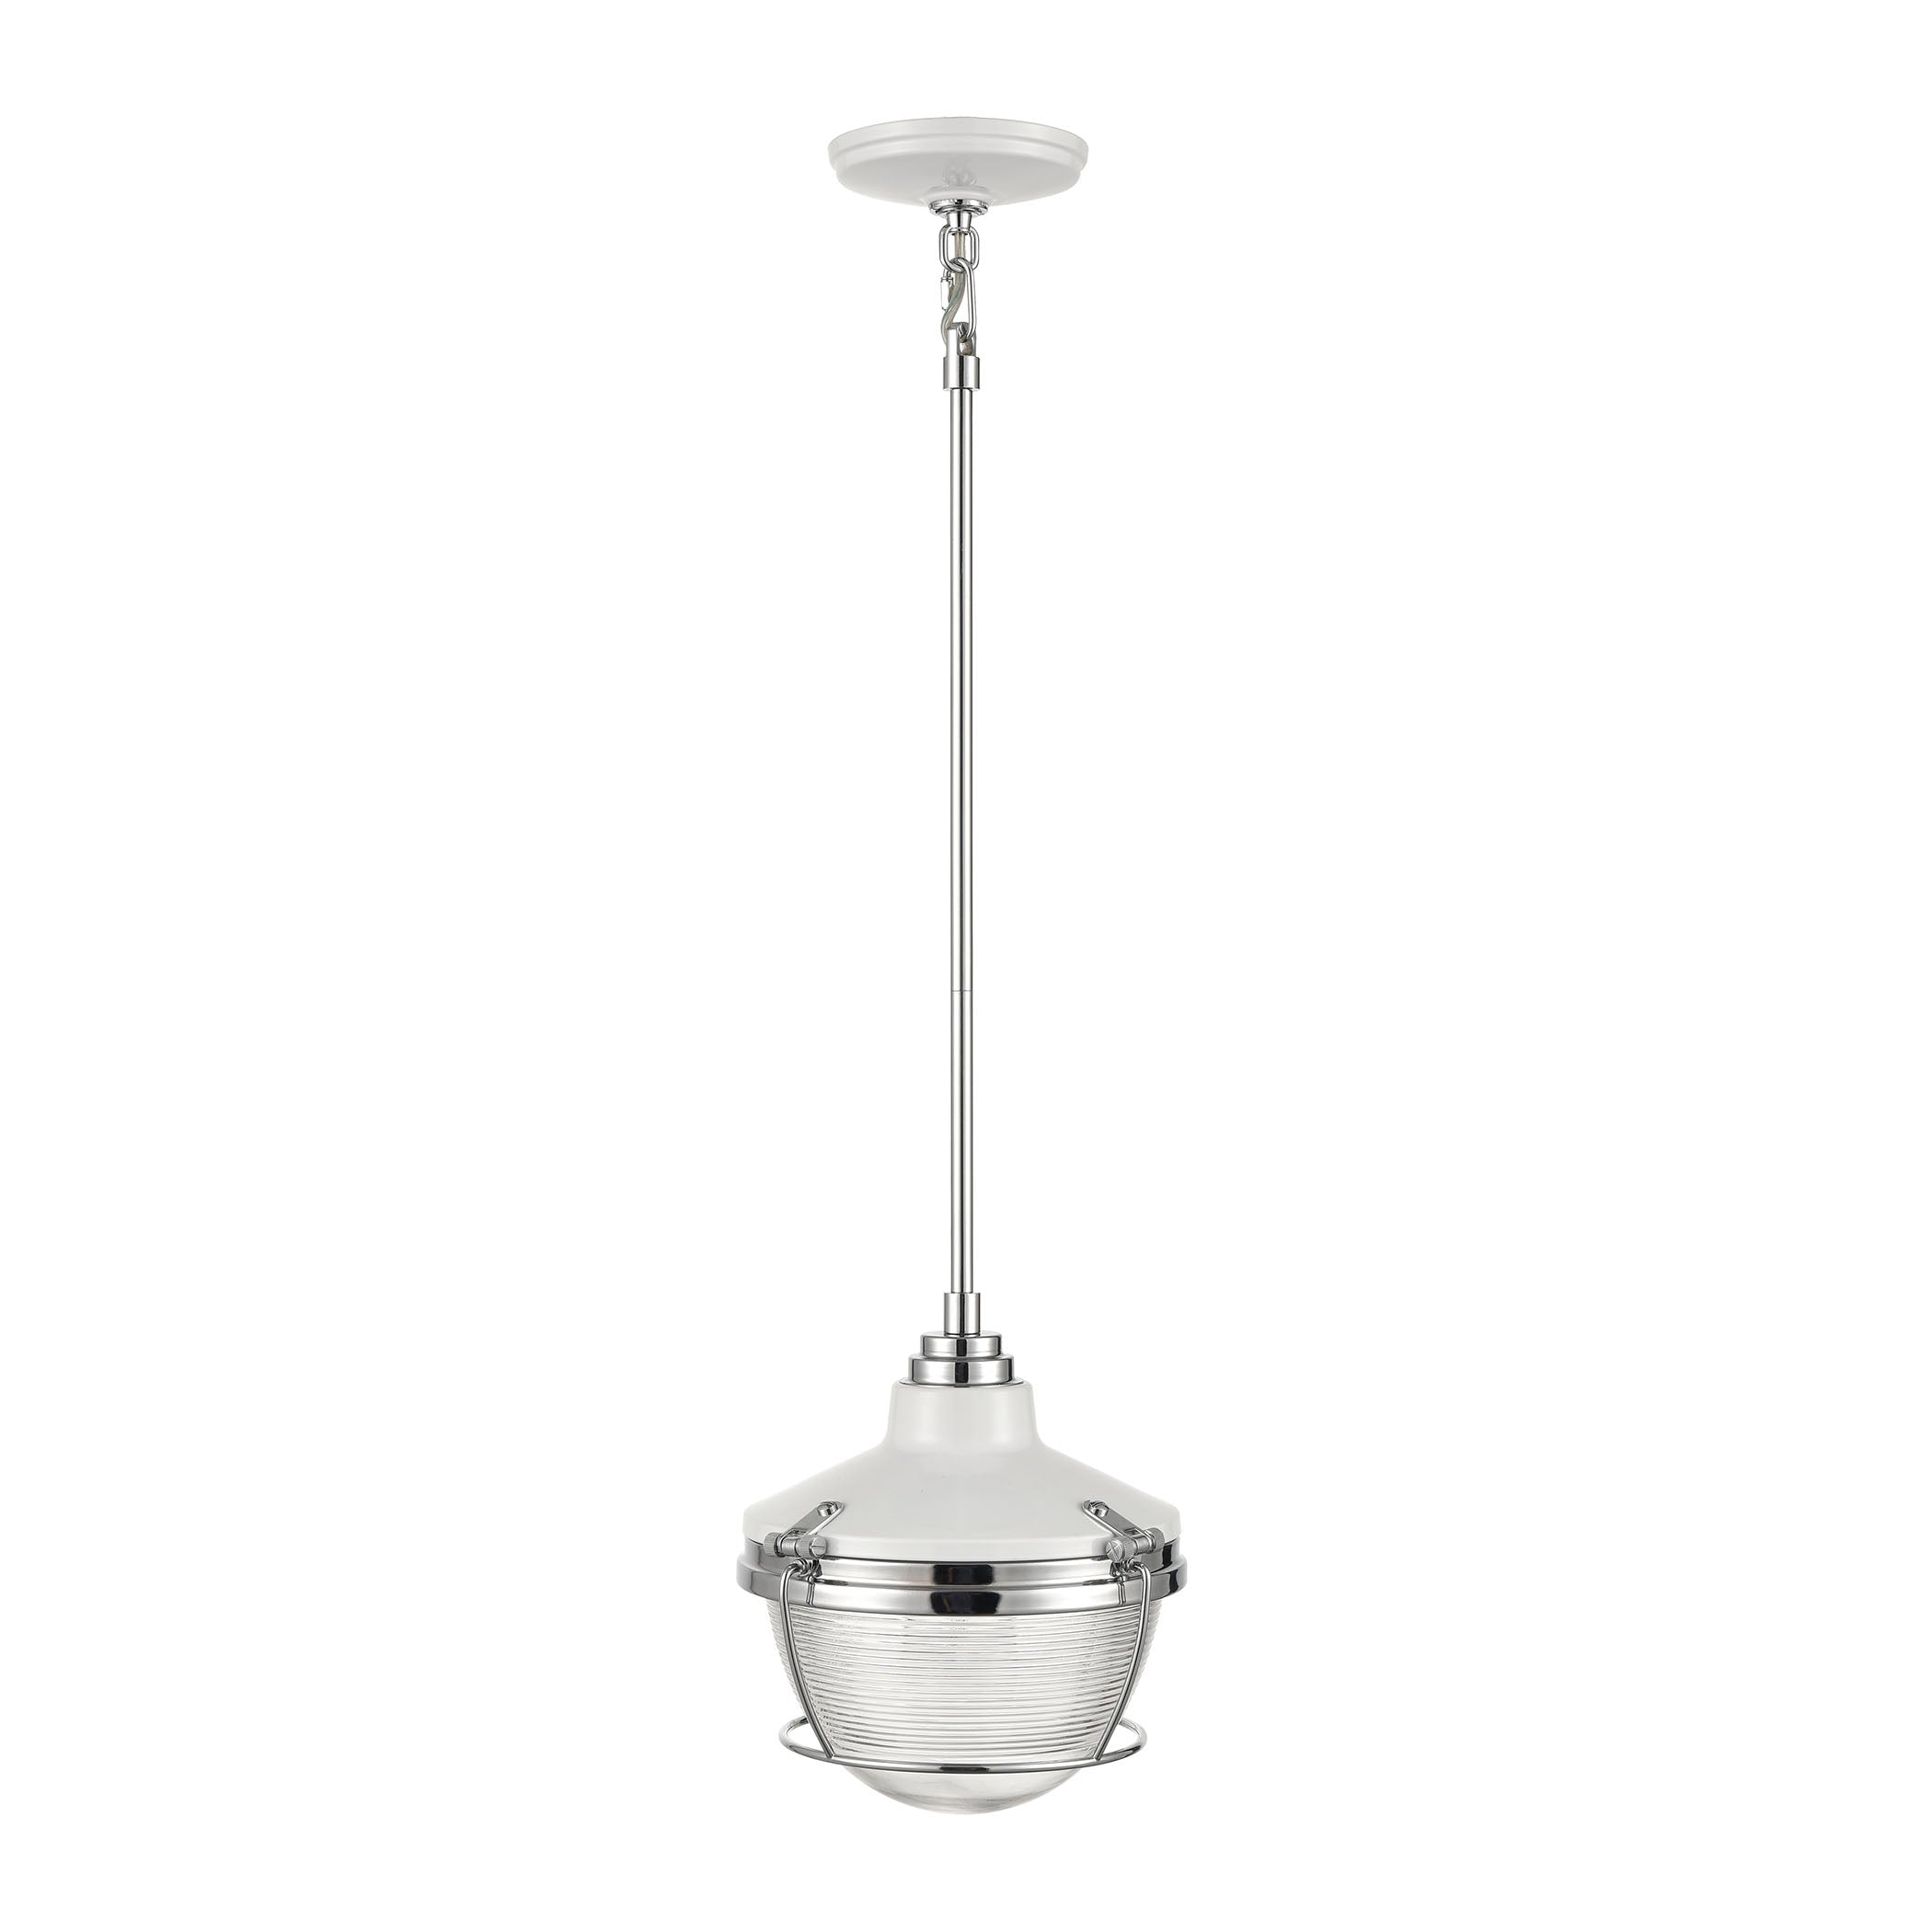 ELK Lighting 16525/1 Seaway Passage 1-Light Mini Pendant in White and Polished Nickel with Clear Ribbed Glass